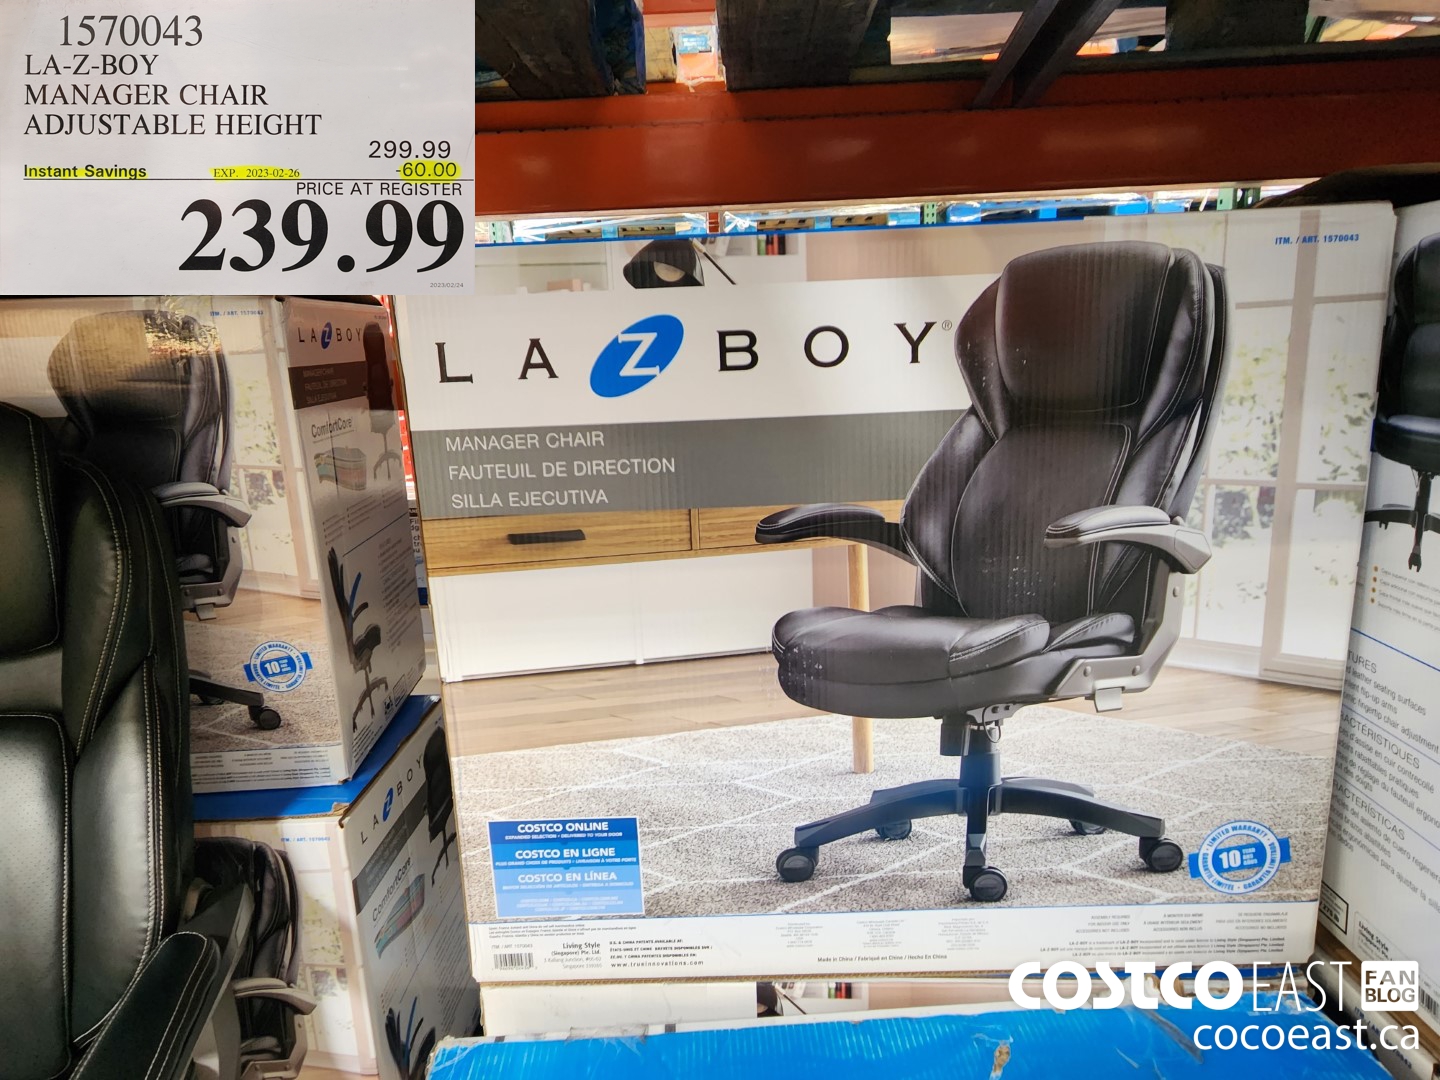 LAZBOY MANAGER CHAIR ADJUSTABLE HEIGHT 20230224 71287 